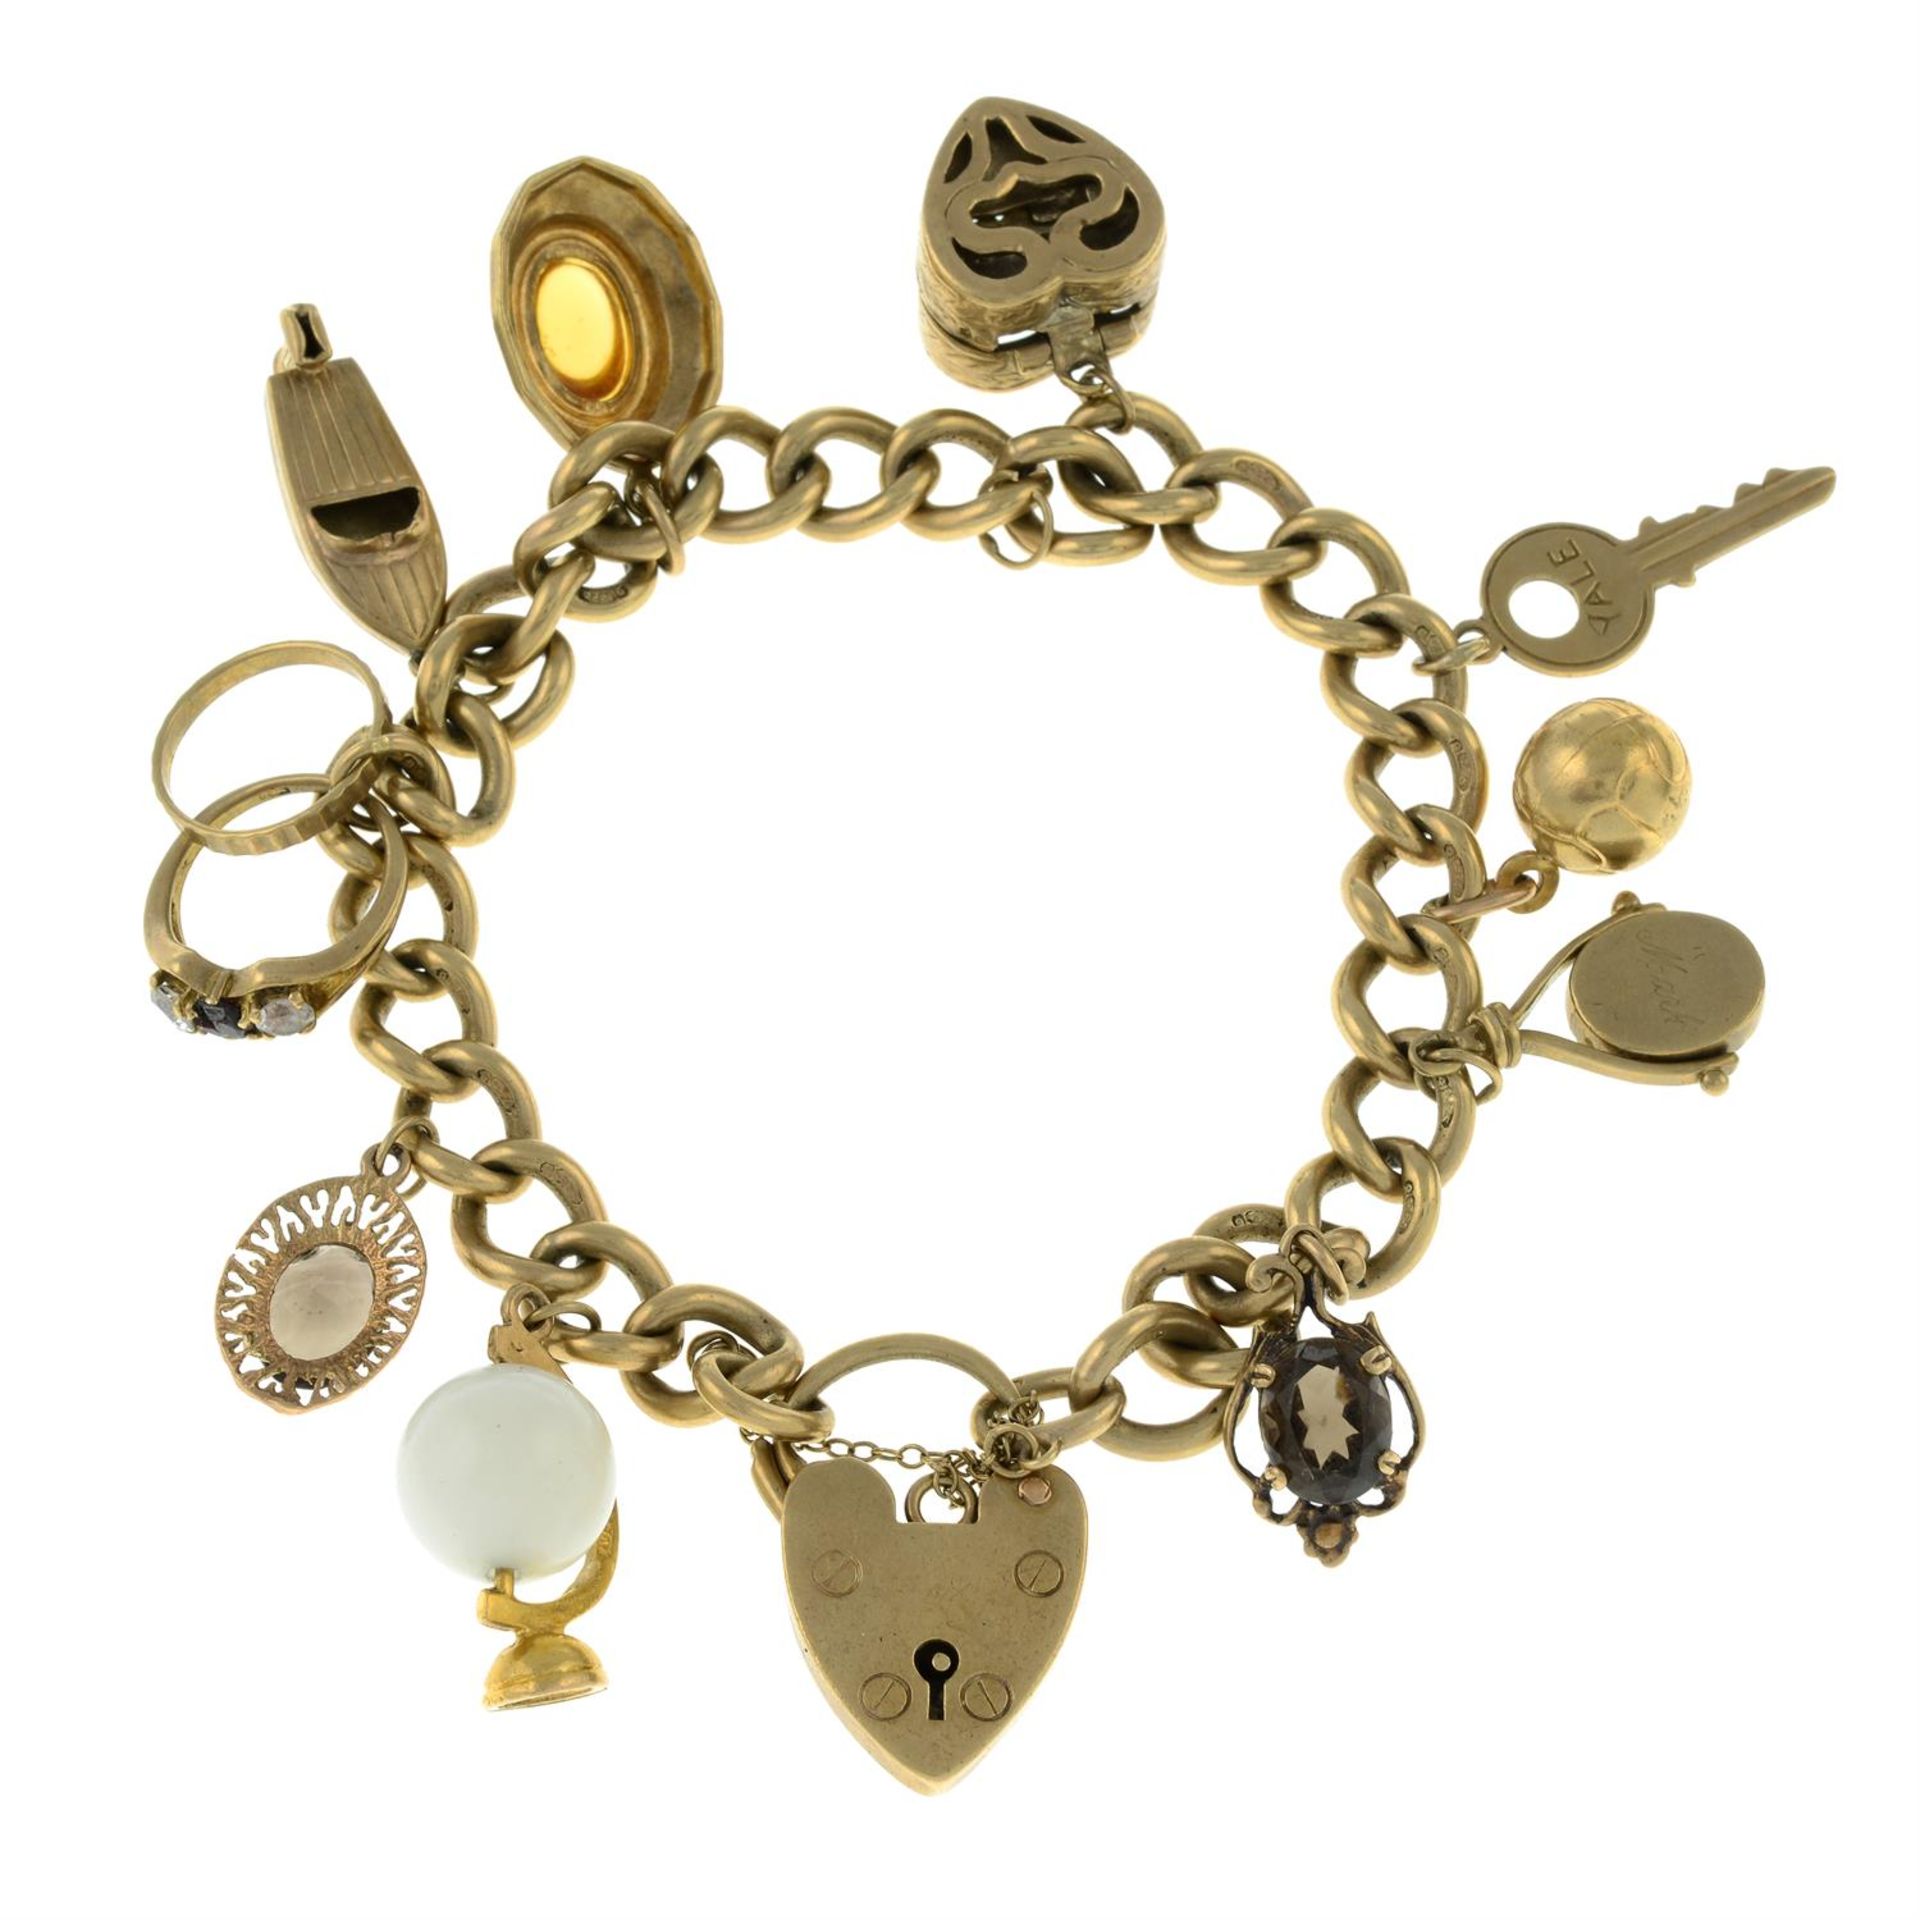 A bracelet, with ten suspended charms and heart-shaped padlock clasp.